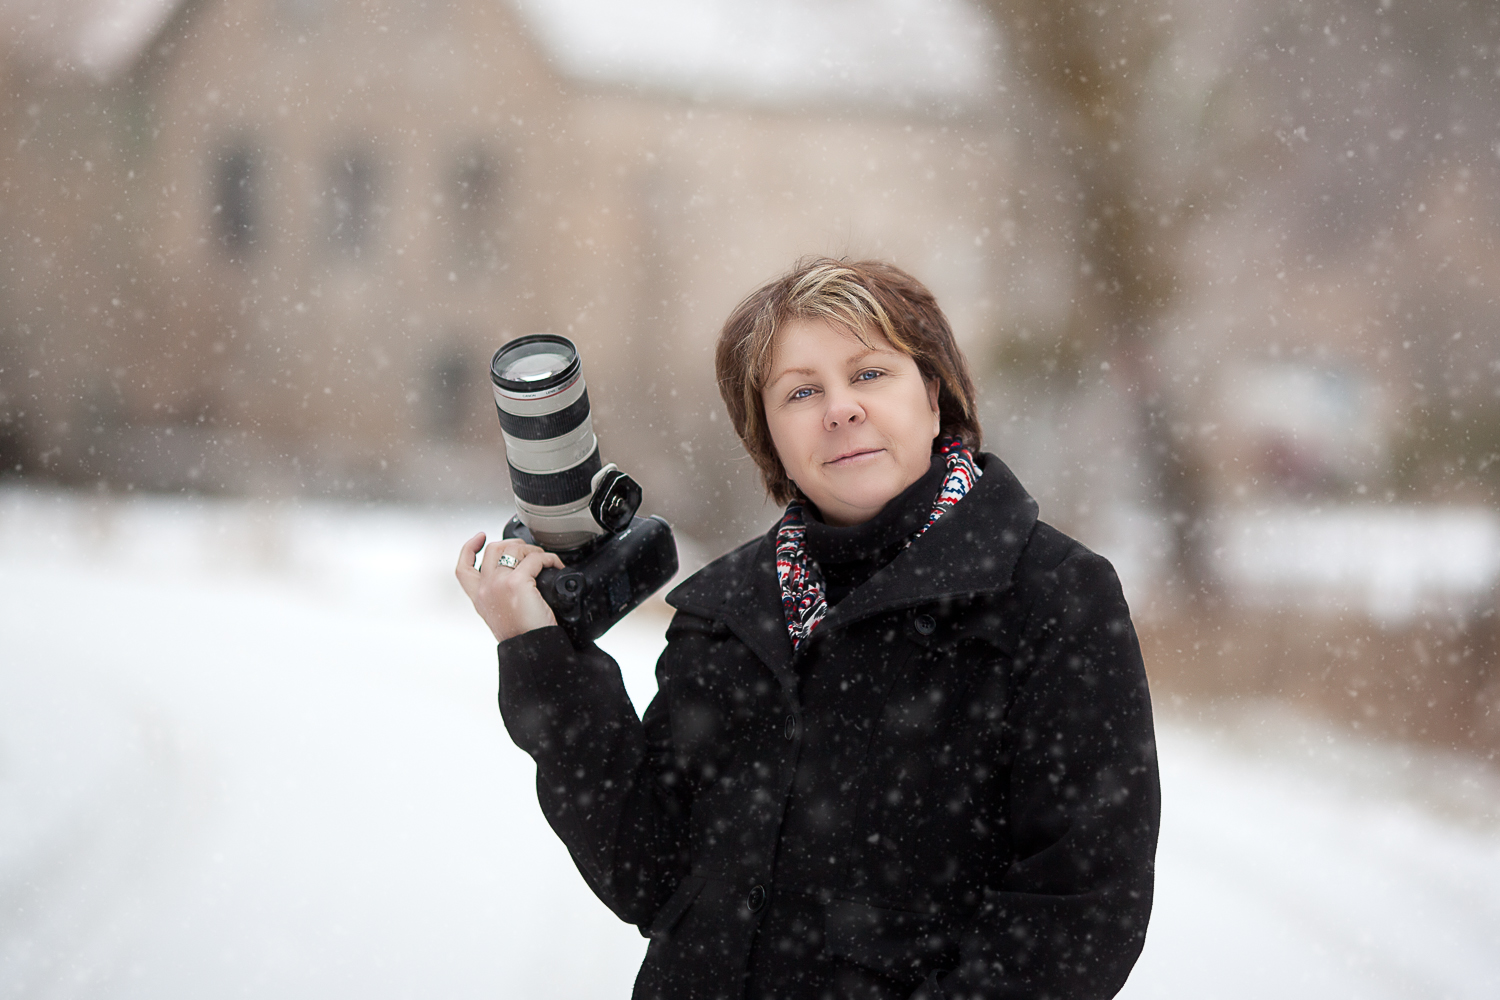 Sandra Randall, Photographer standing holding a camera in the snow with a black jacket on.